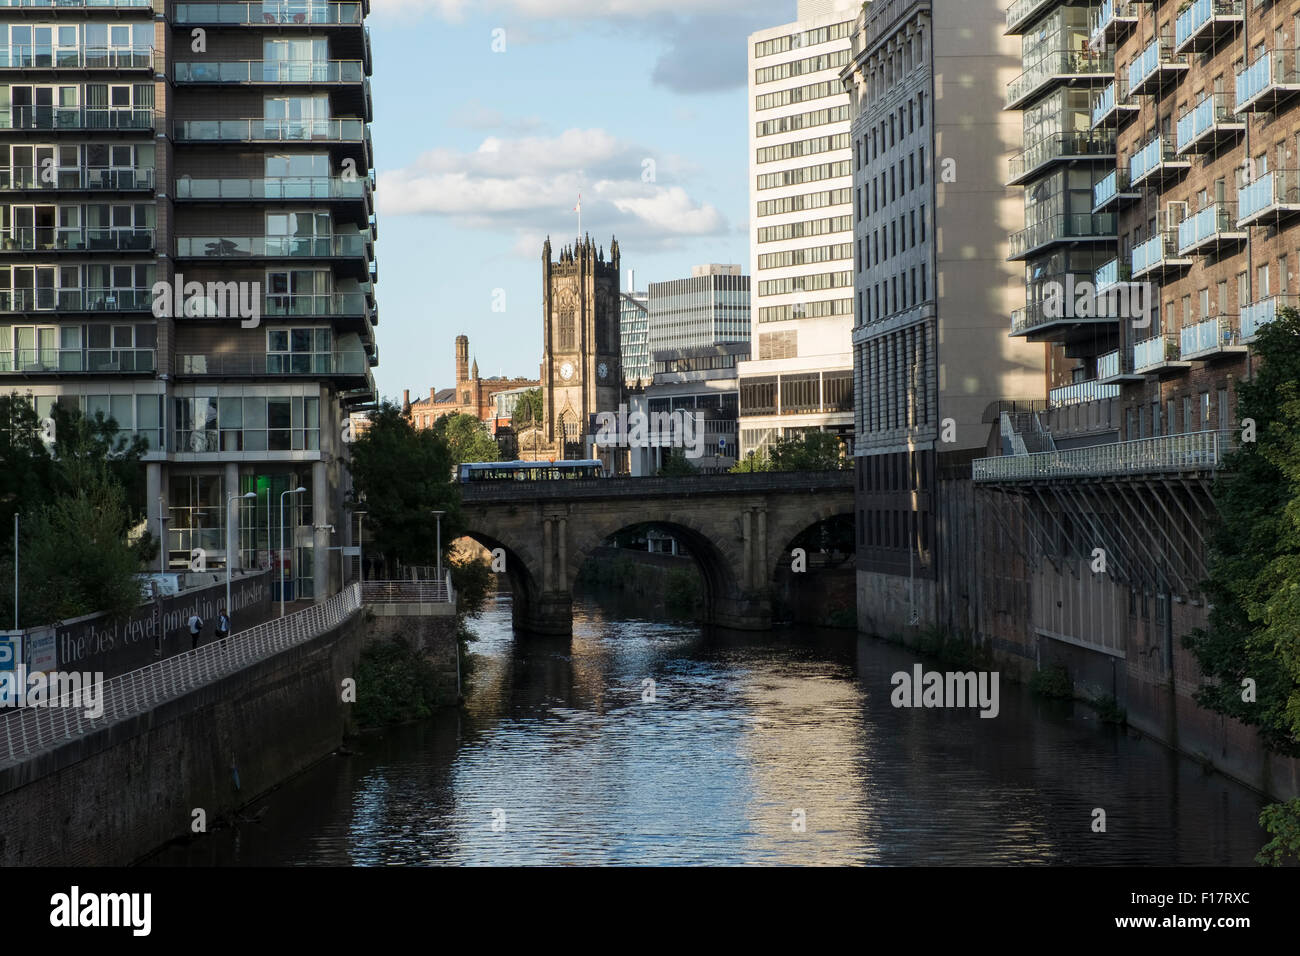 Manchester cathedral viewed from Calatrava Bridge over the River Irwell, Manchester, England Stock Photo